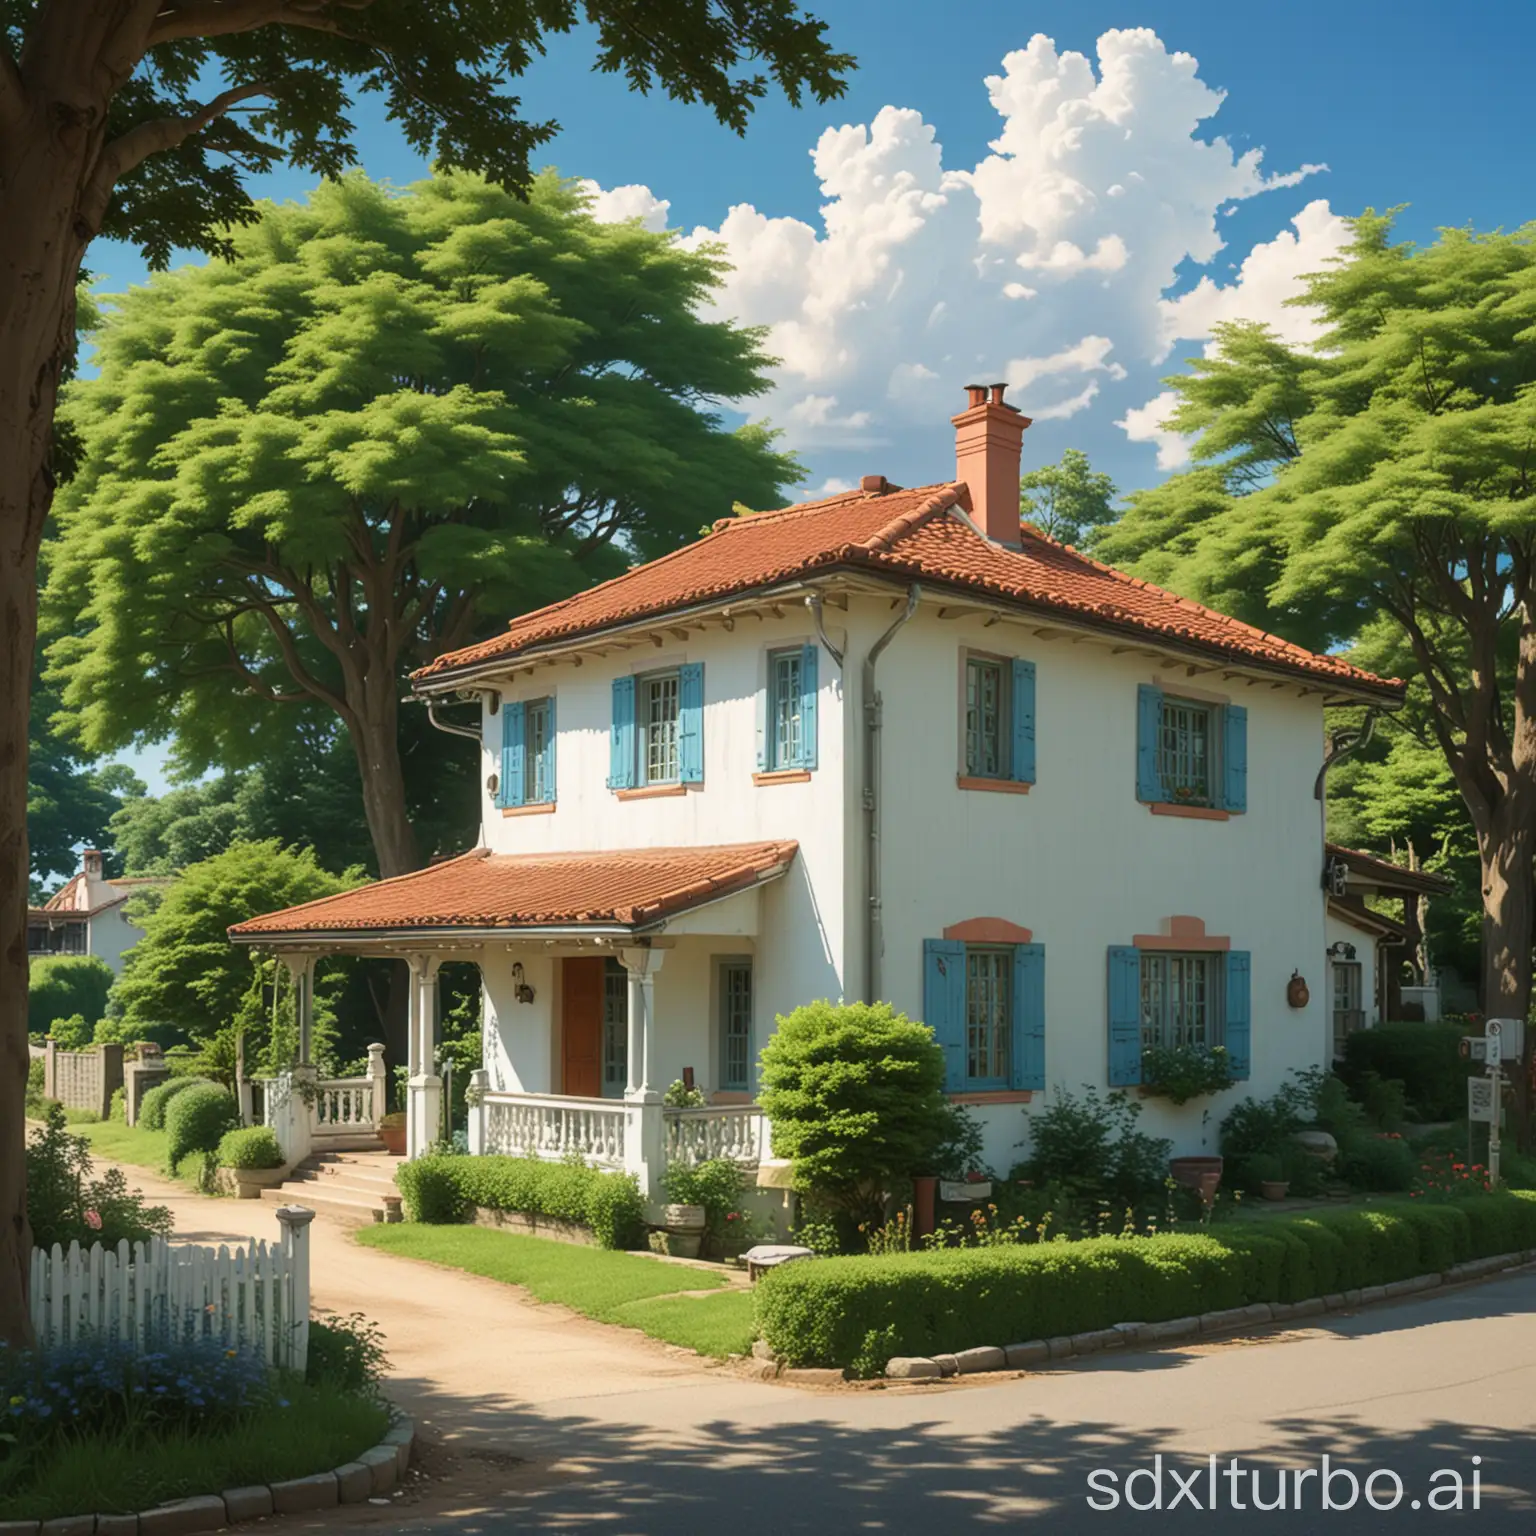 Tranquil-Rural-Setting-with-Charming-TwoStory-House-and-Classic-Car